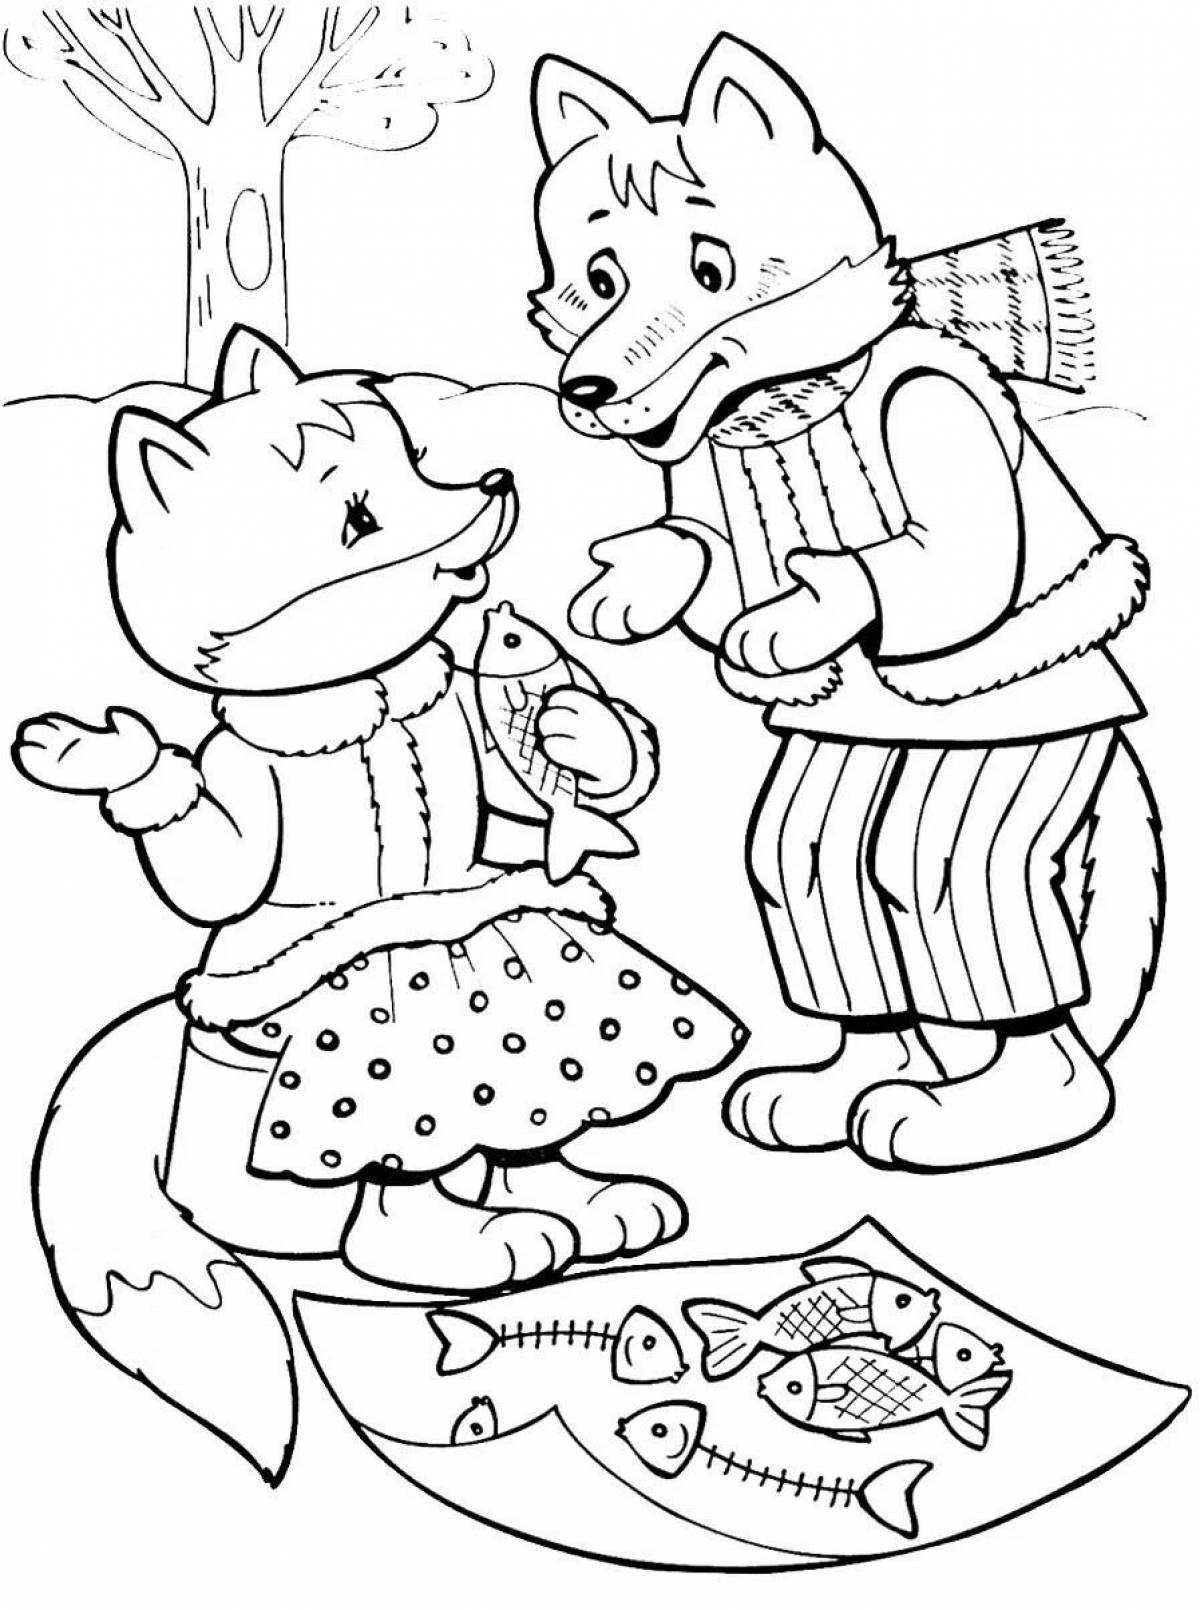 Fox and wolf for kids #8